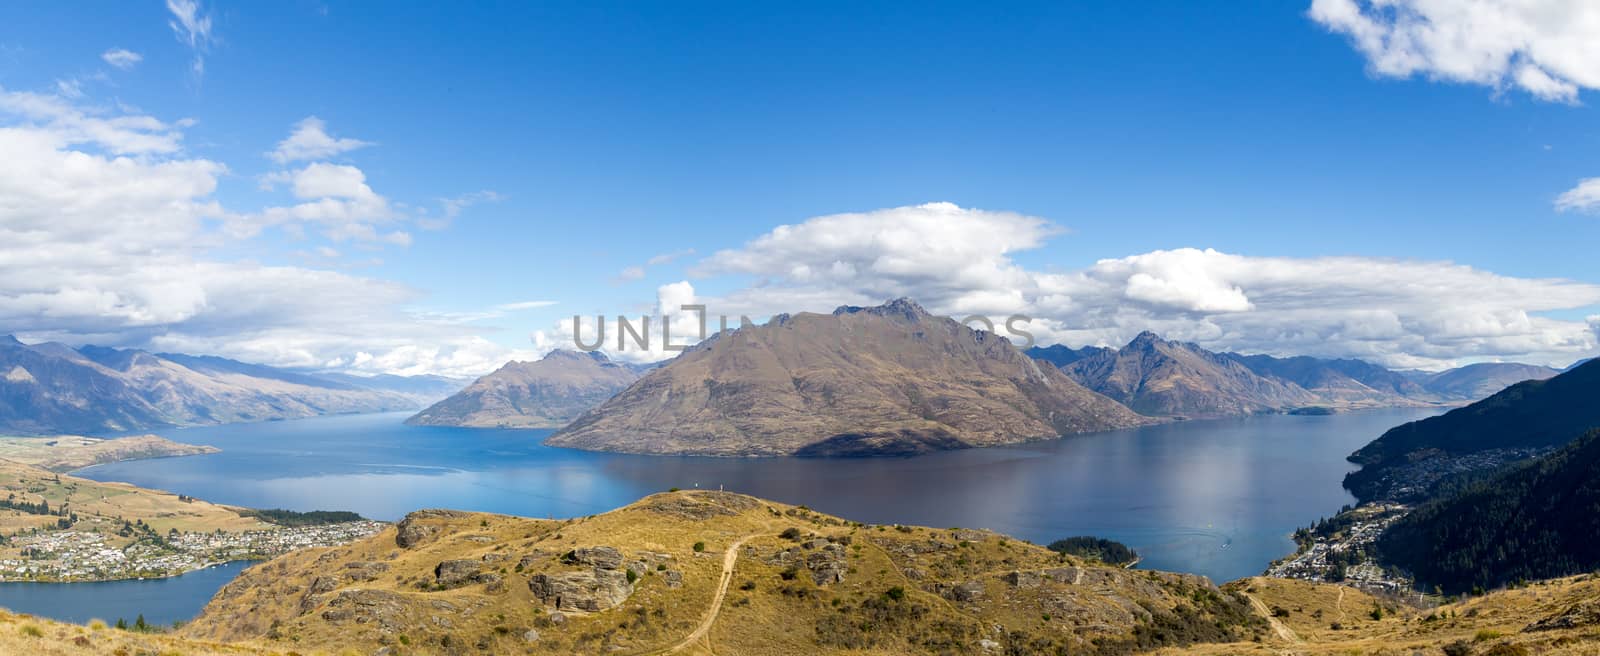 Panoramic View from Queenstown Hill, New Zealand by oliverfoerstner